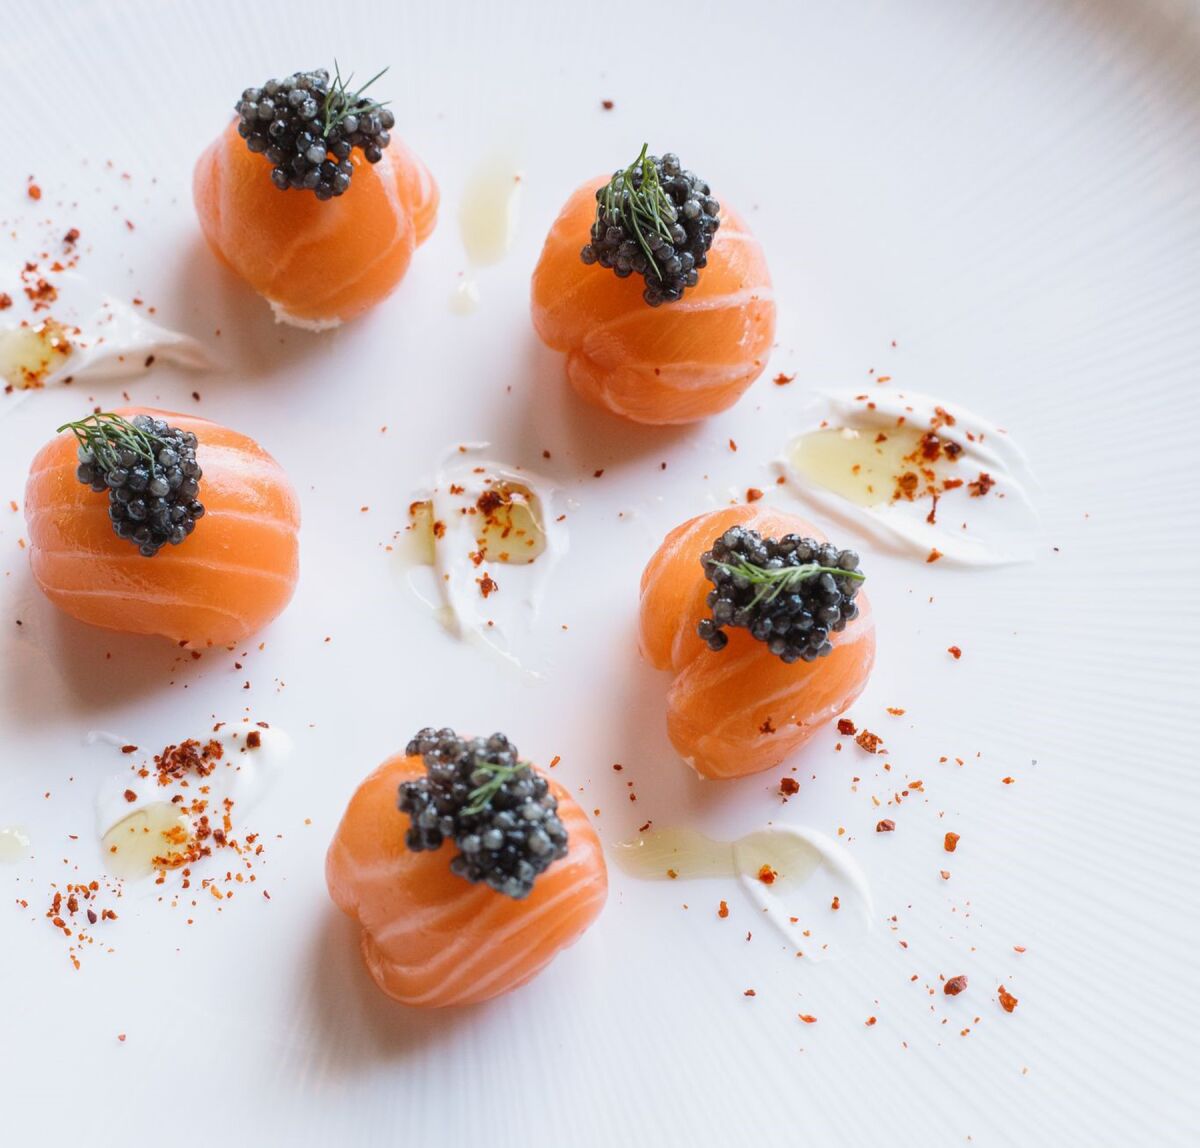 Smoked Salmon Poppers are filled with a blend of caviar, mascarpone mousse, dill and shallots.